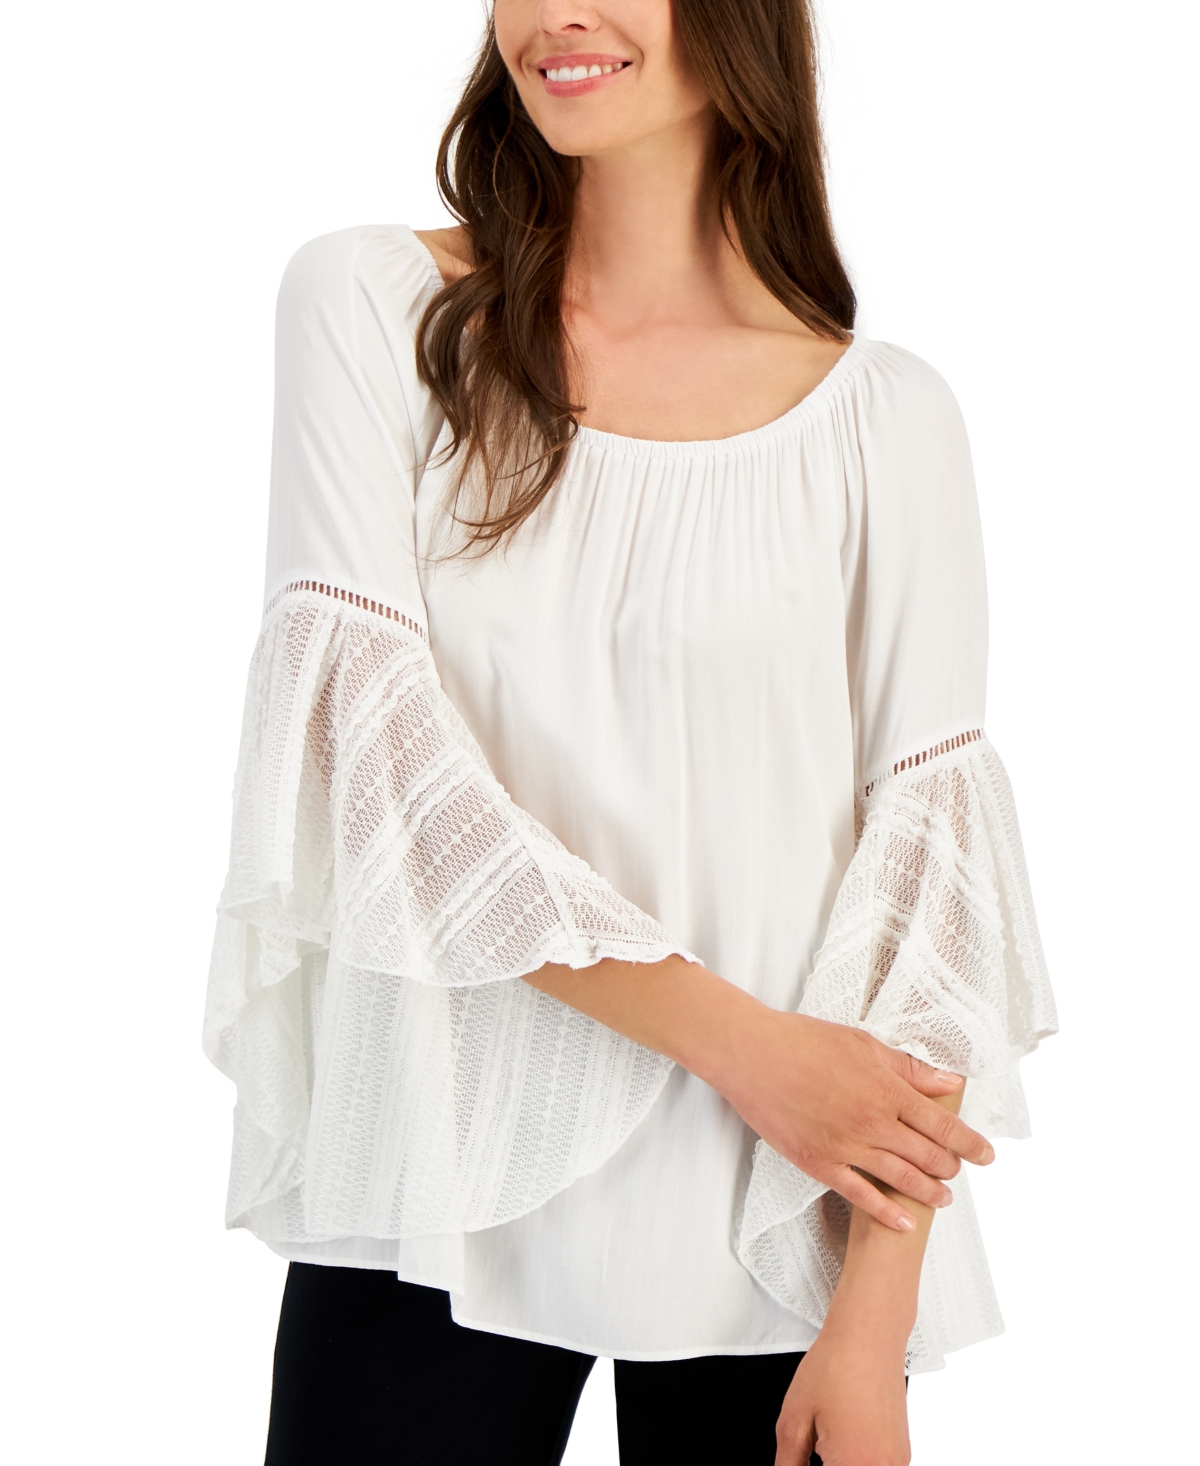 Fever Women's On & Off-the-Shoulder Lace Bell Sleeve Top